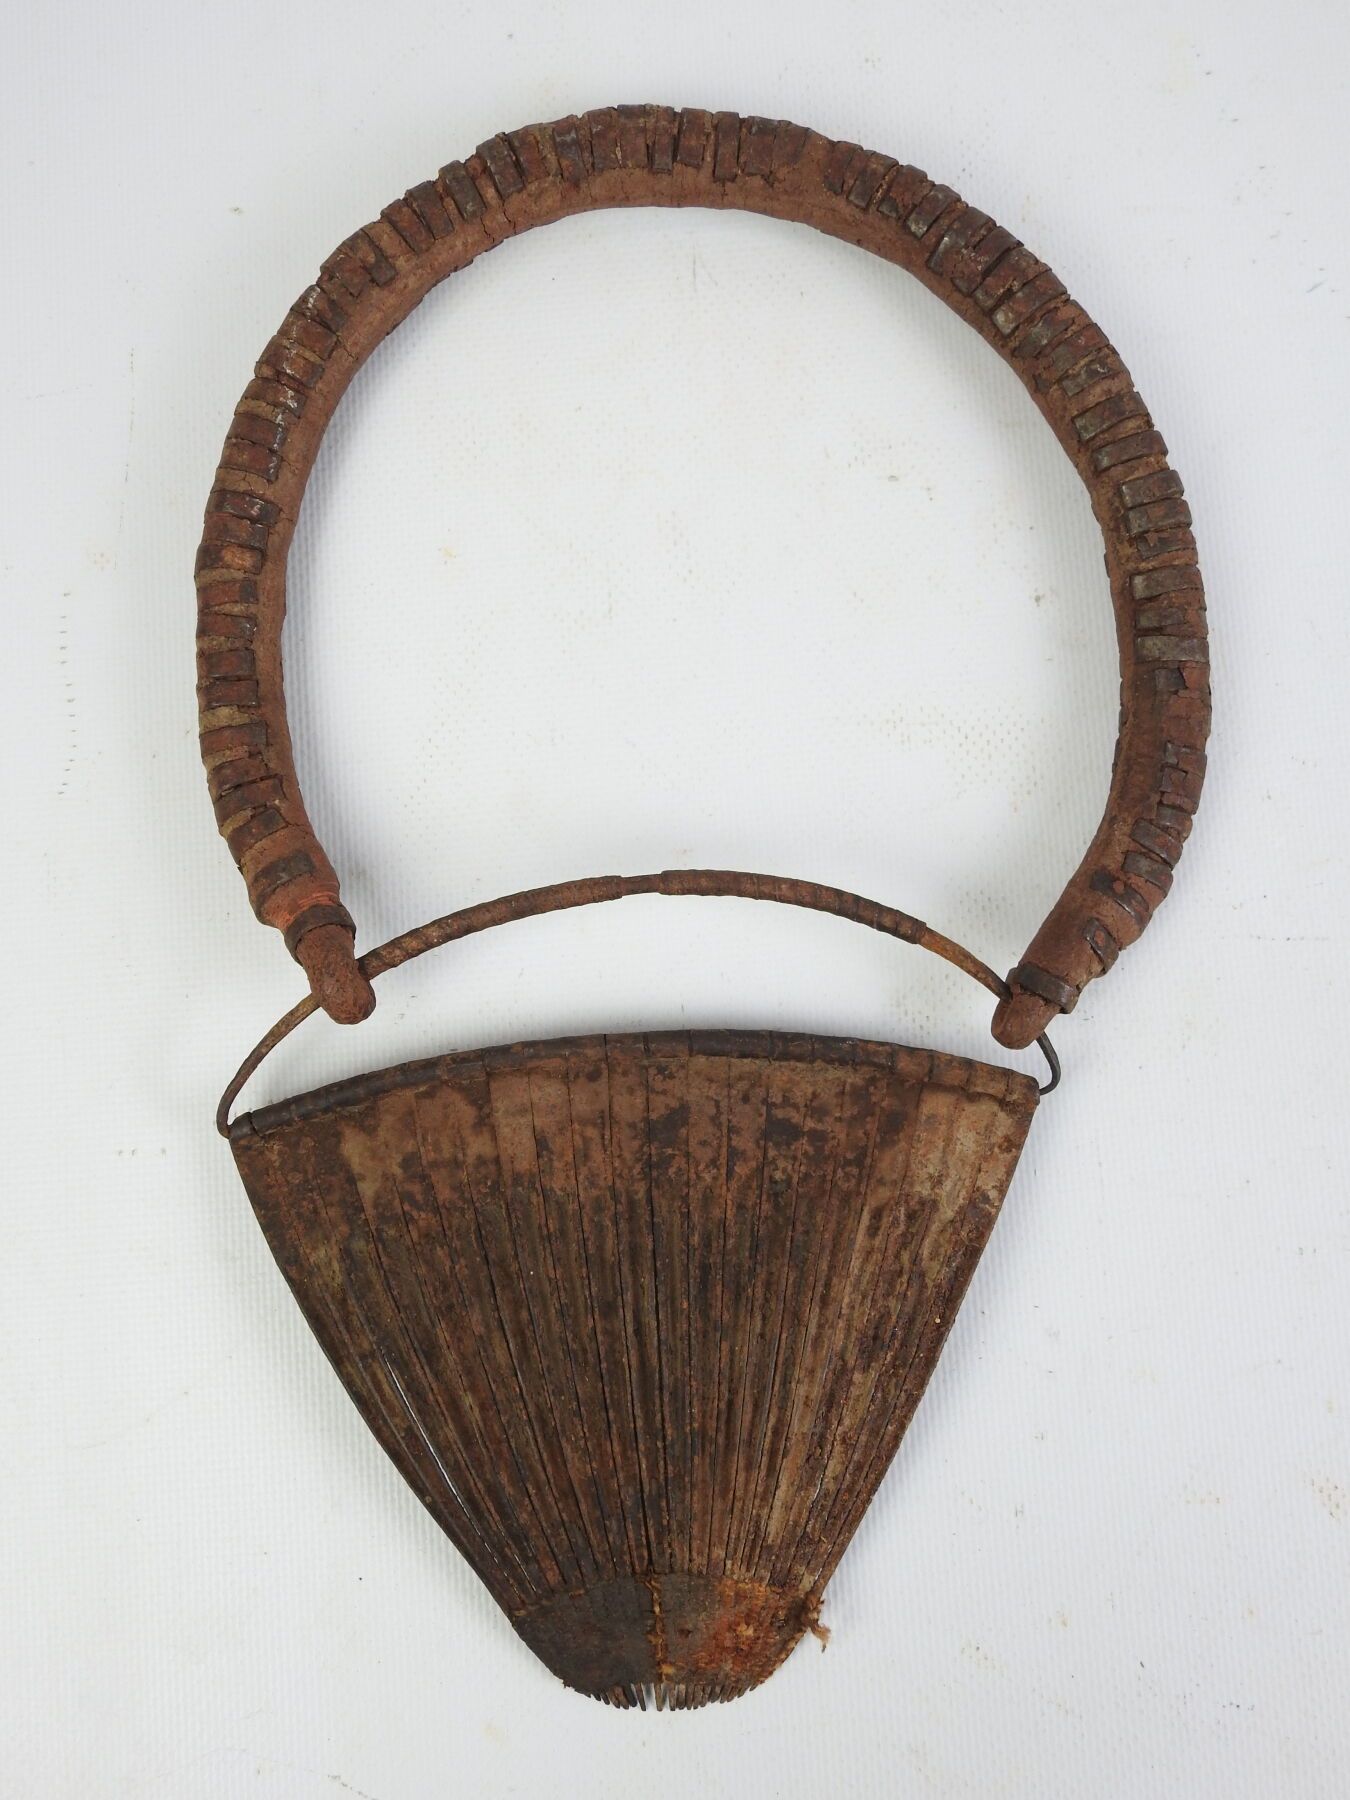 MATAKAM North Cameroon, Sex cover composed of an iron pu…